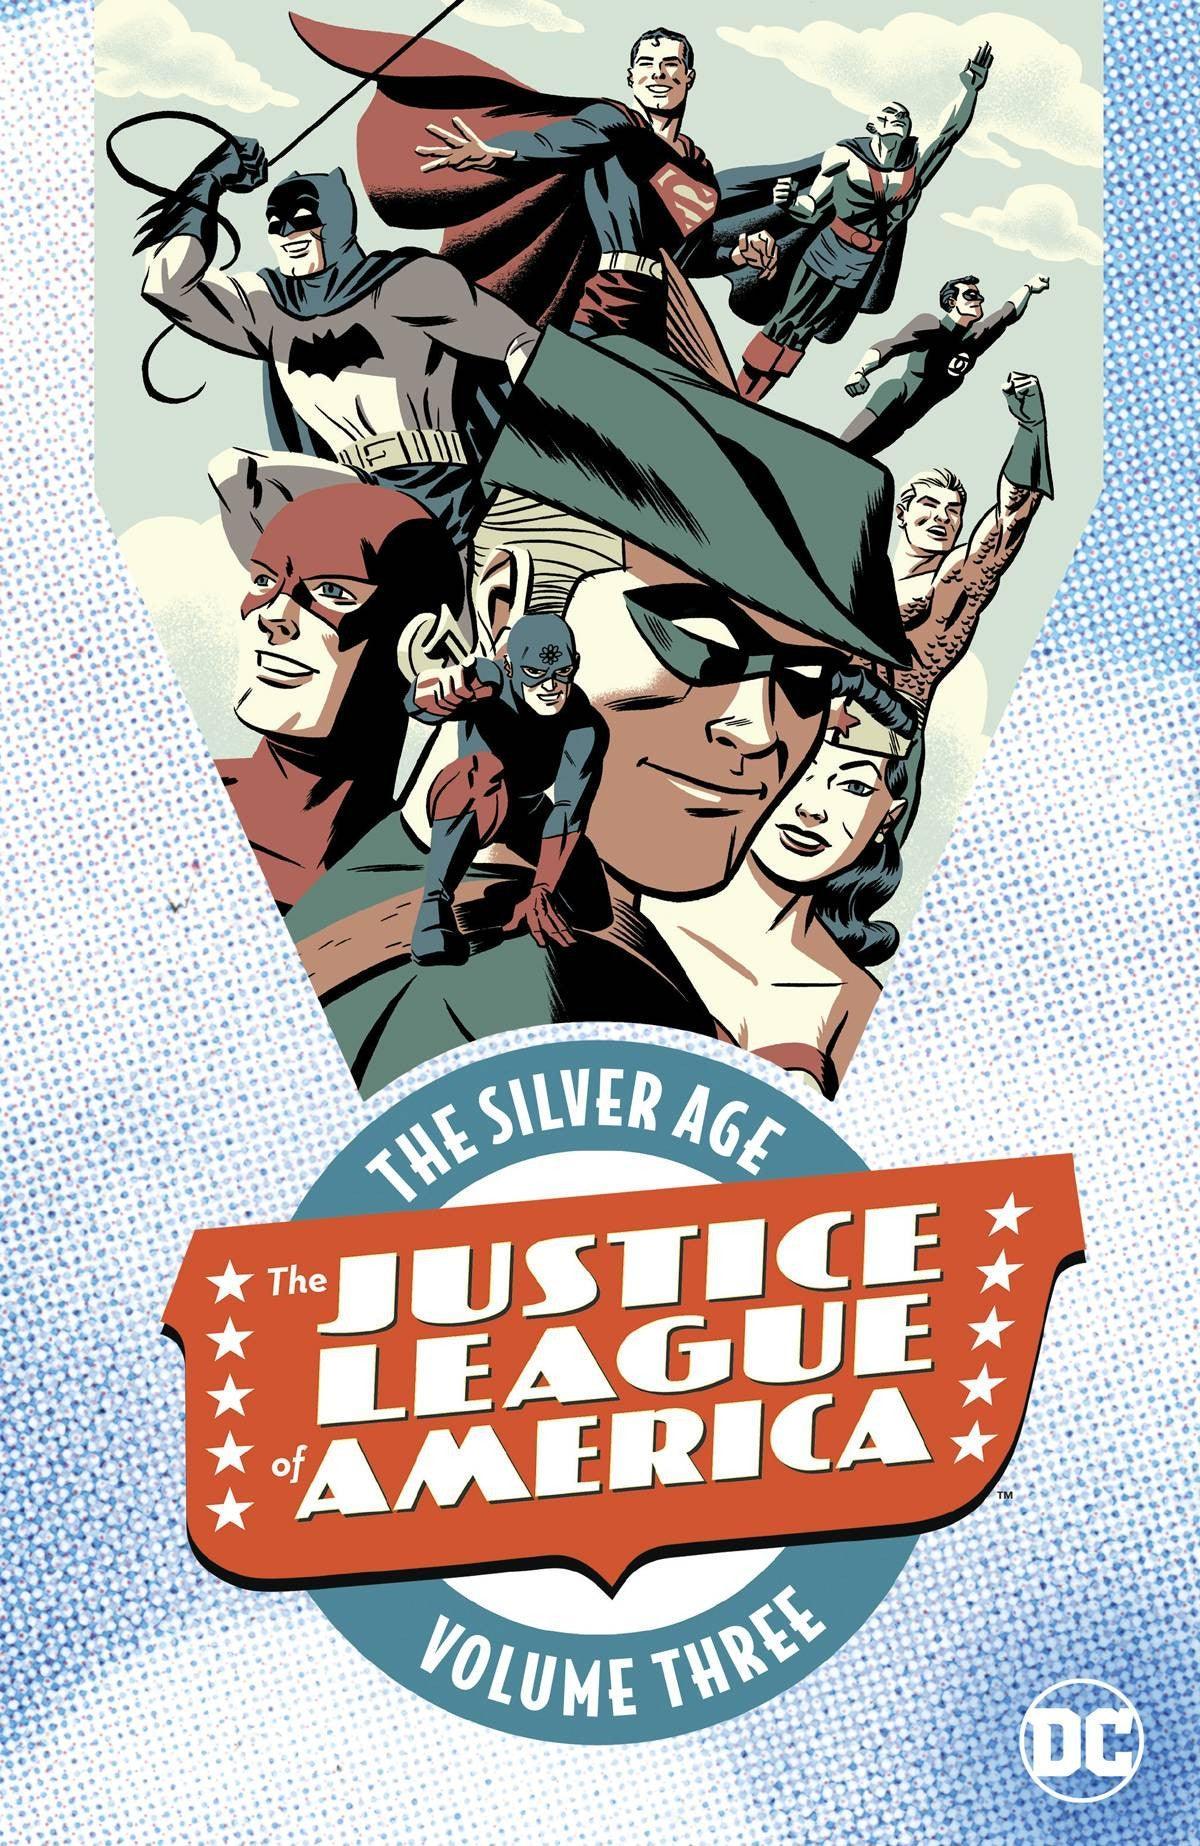 JUSTICE LEAGUE OF AMERICA THE SILVER AGE TP VOL 03 - Kings Comics